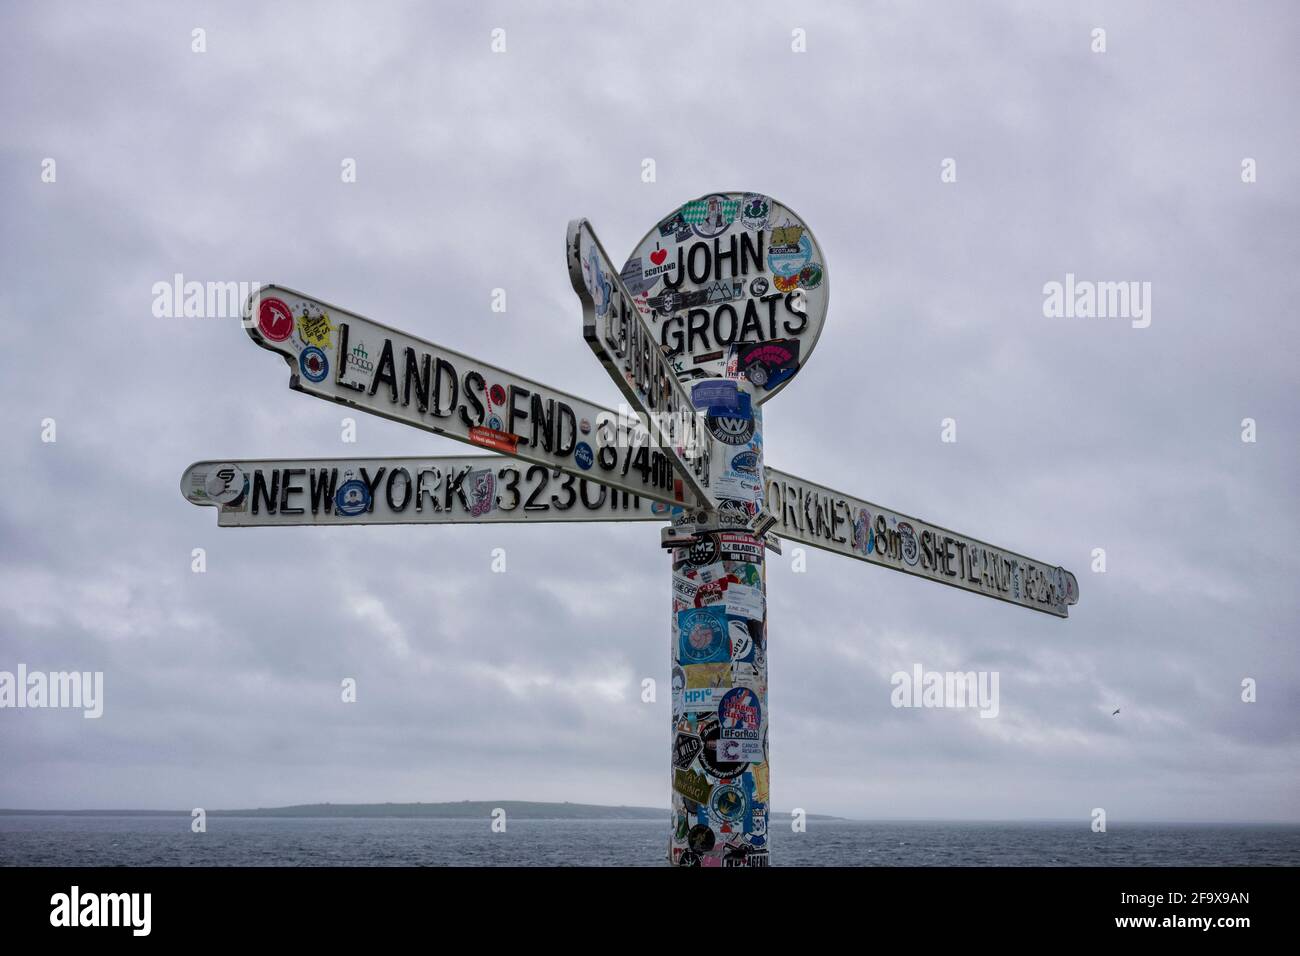 John O'Groats, UK - June 24, 2019: The landmark "Journey's End" signpost at John o' Groats, a popular tourist attraction marking the furthest north on Stock Photo